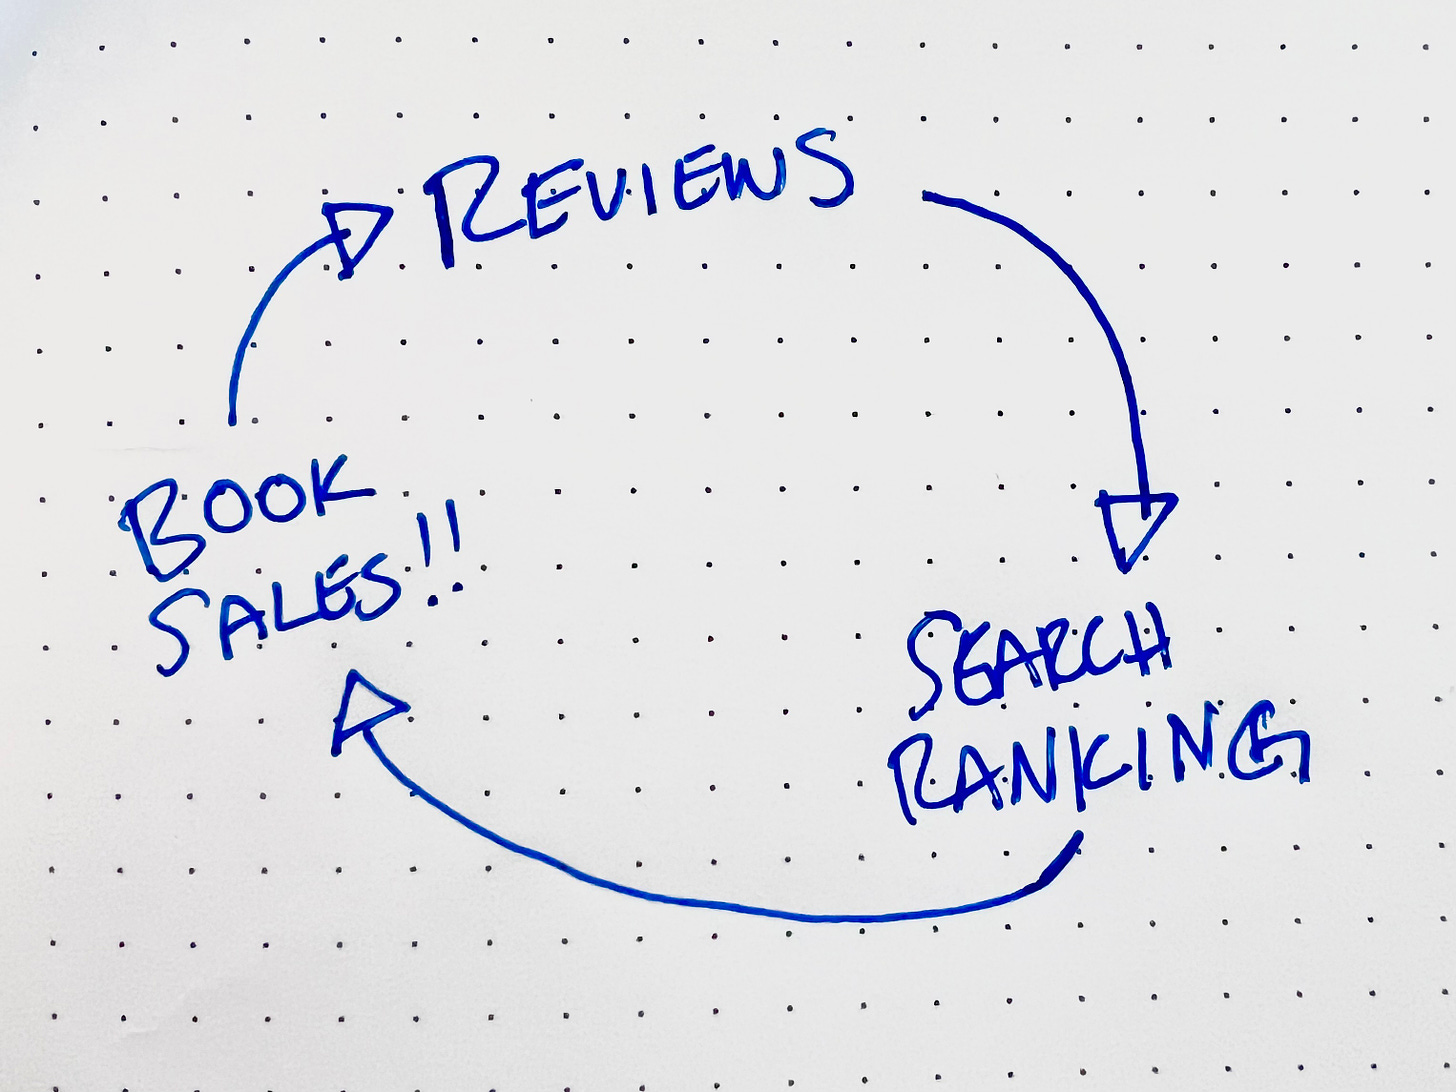 A chart with arrows going from 'reviews' to 'search ranking' to 'book sales!!' and back to 'reviews.